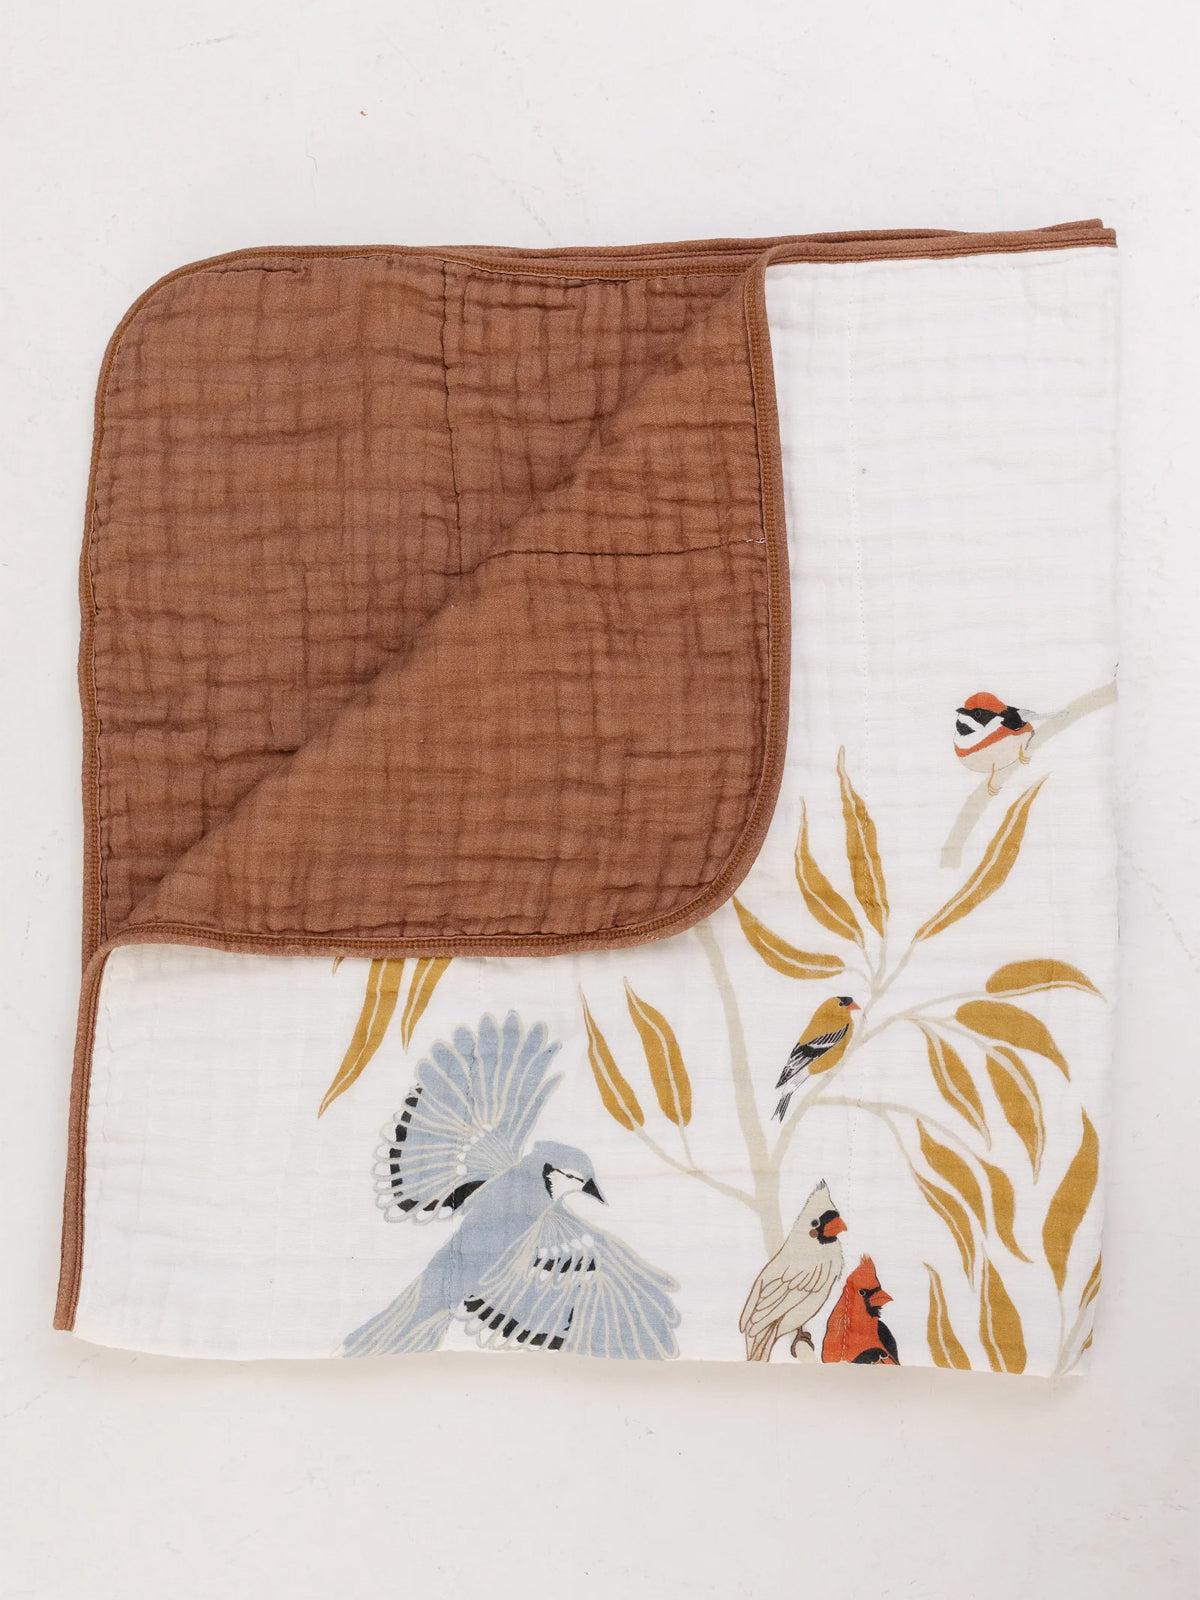 For the Birds Quilt